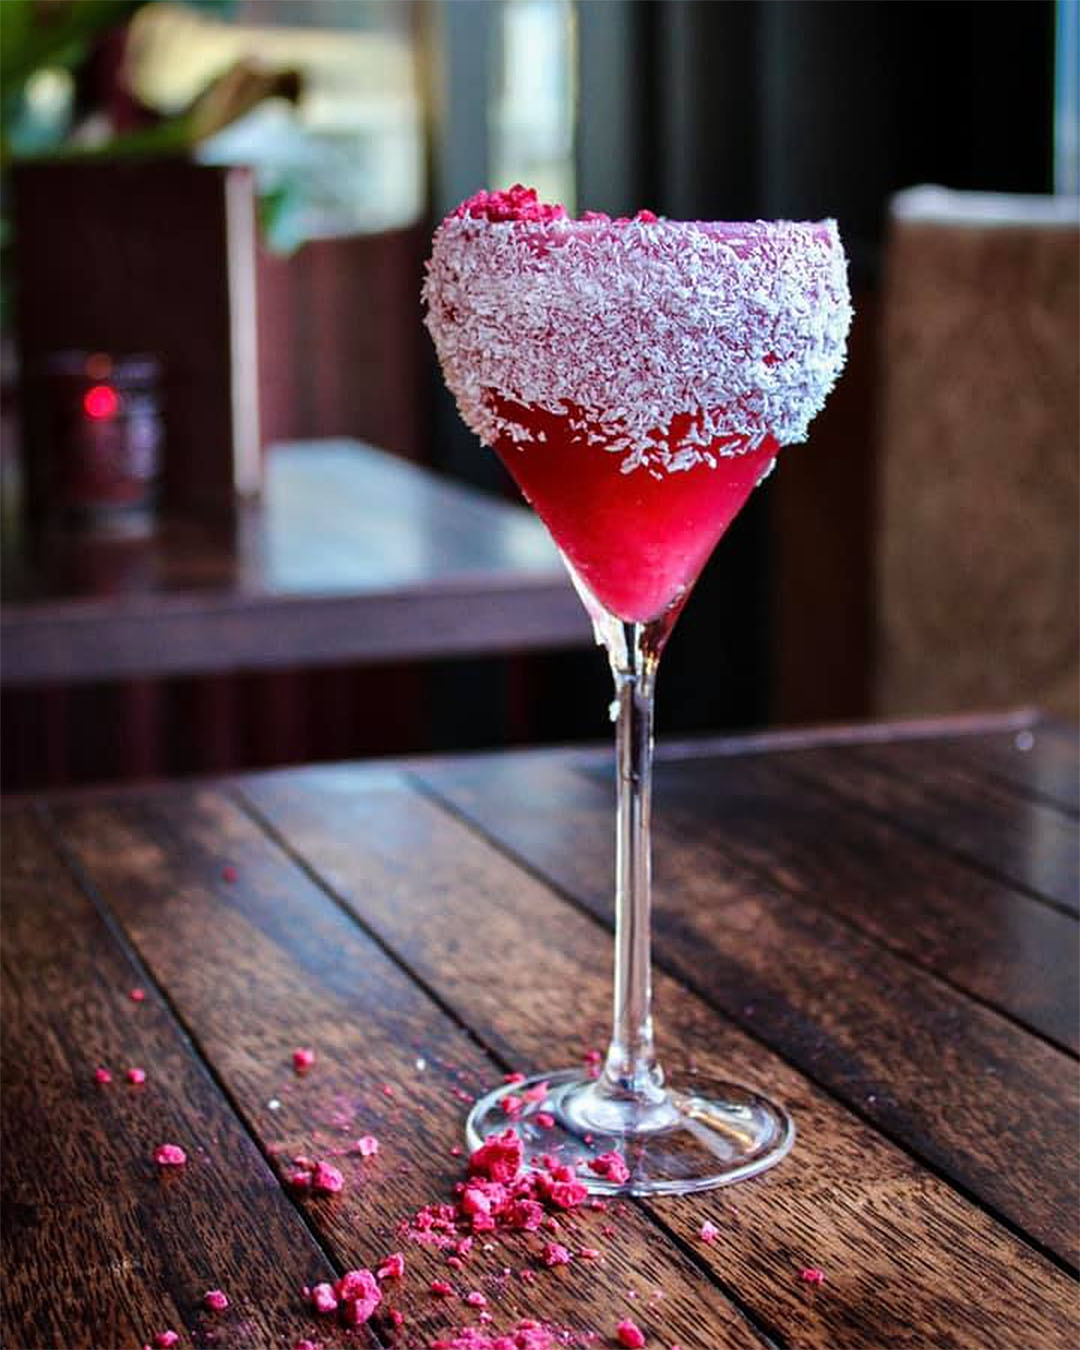 A raspberry lamington drink at The Dirty Land in Christchurch.